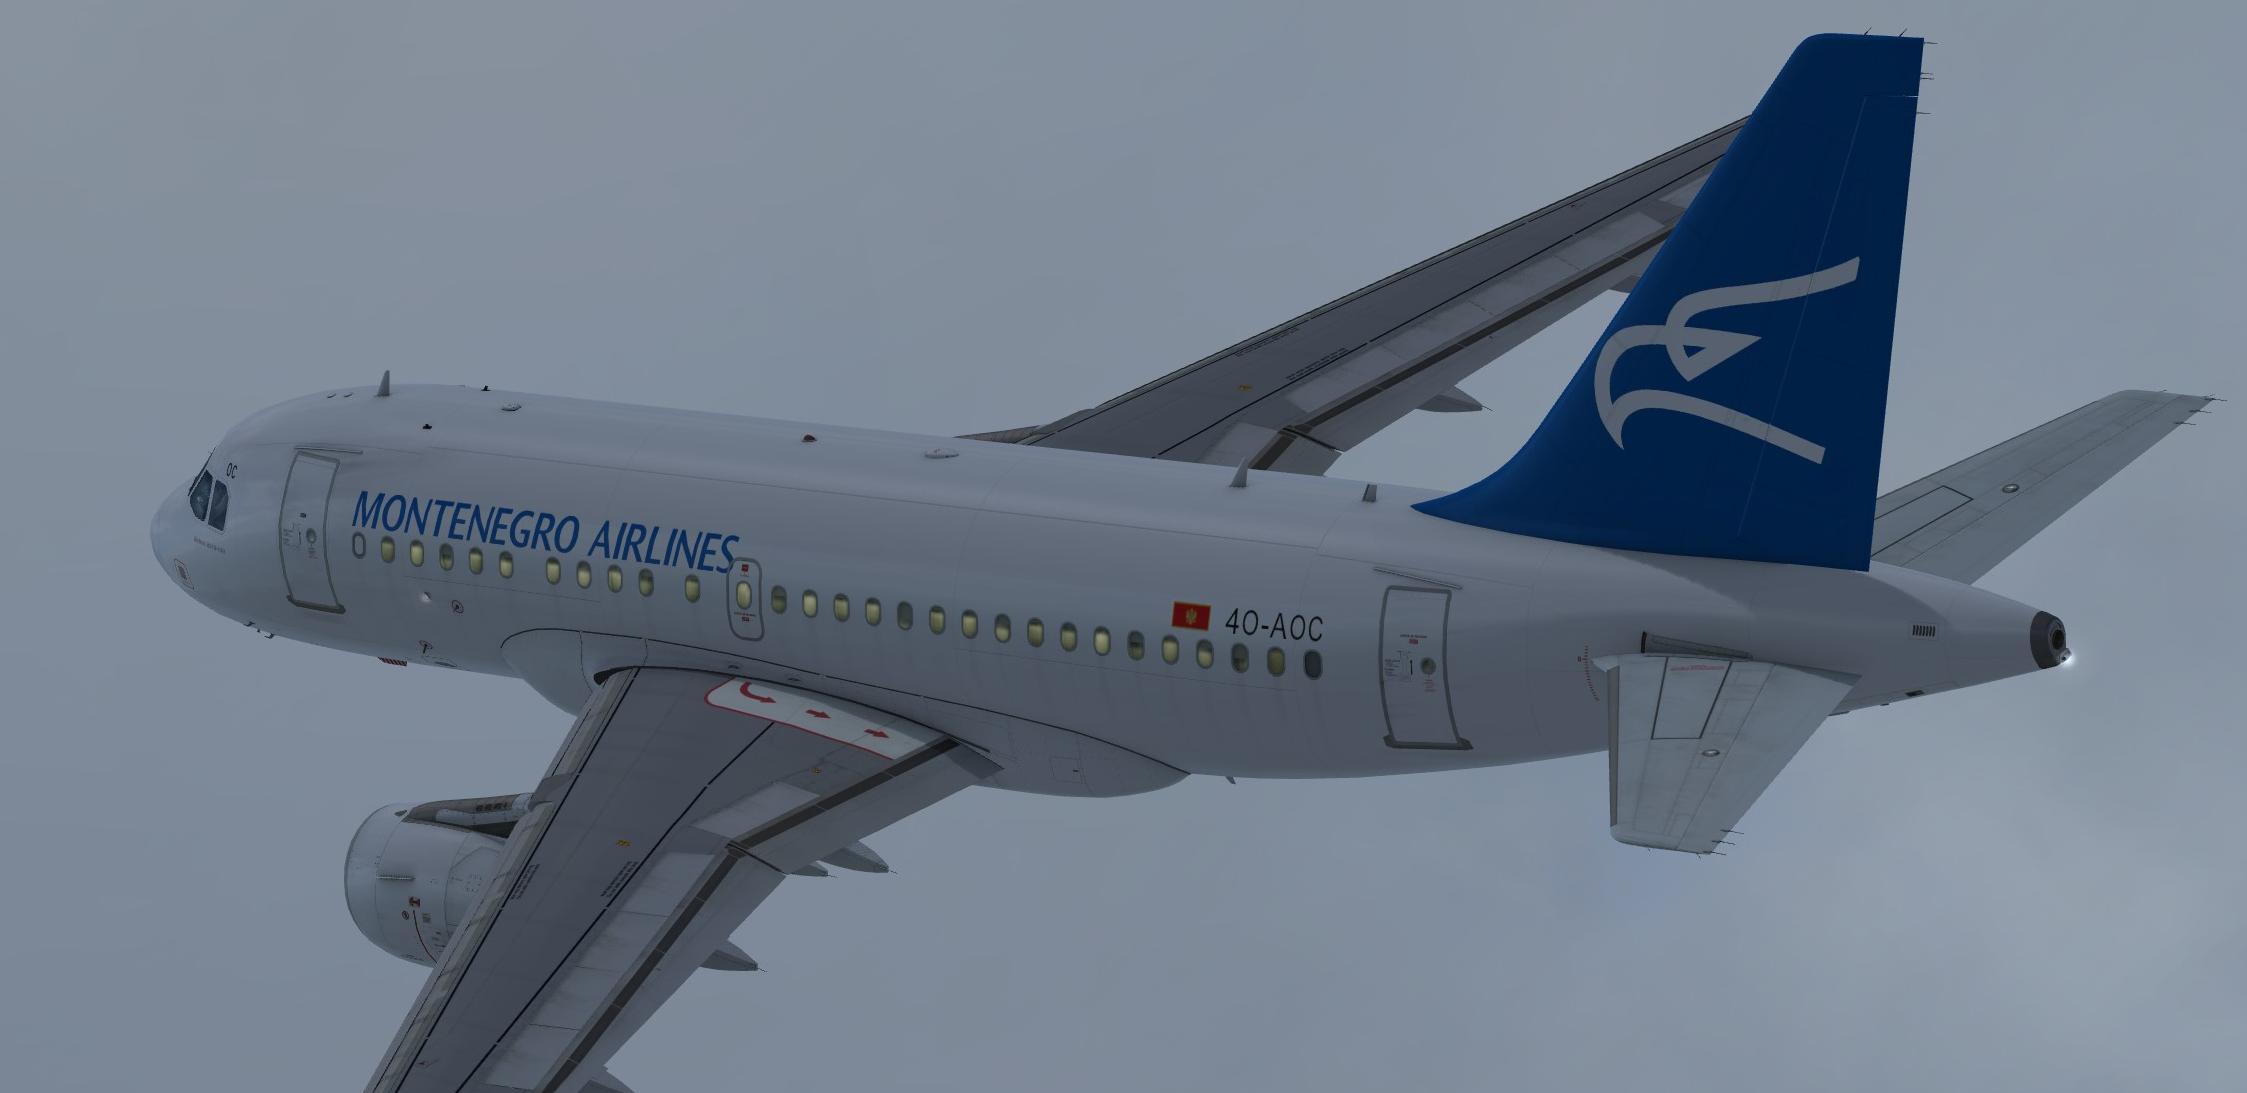 Montenegro Airlines (fictional) Airbus A318-111 CFM